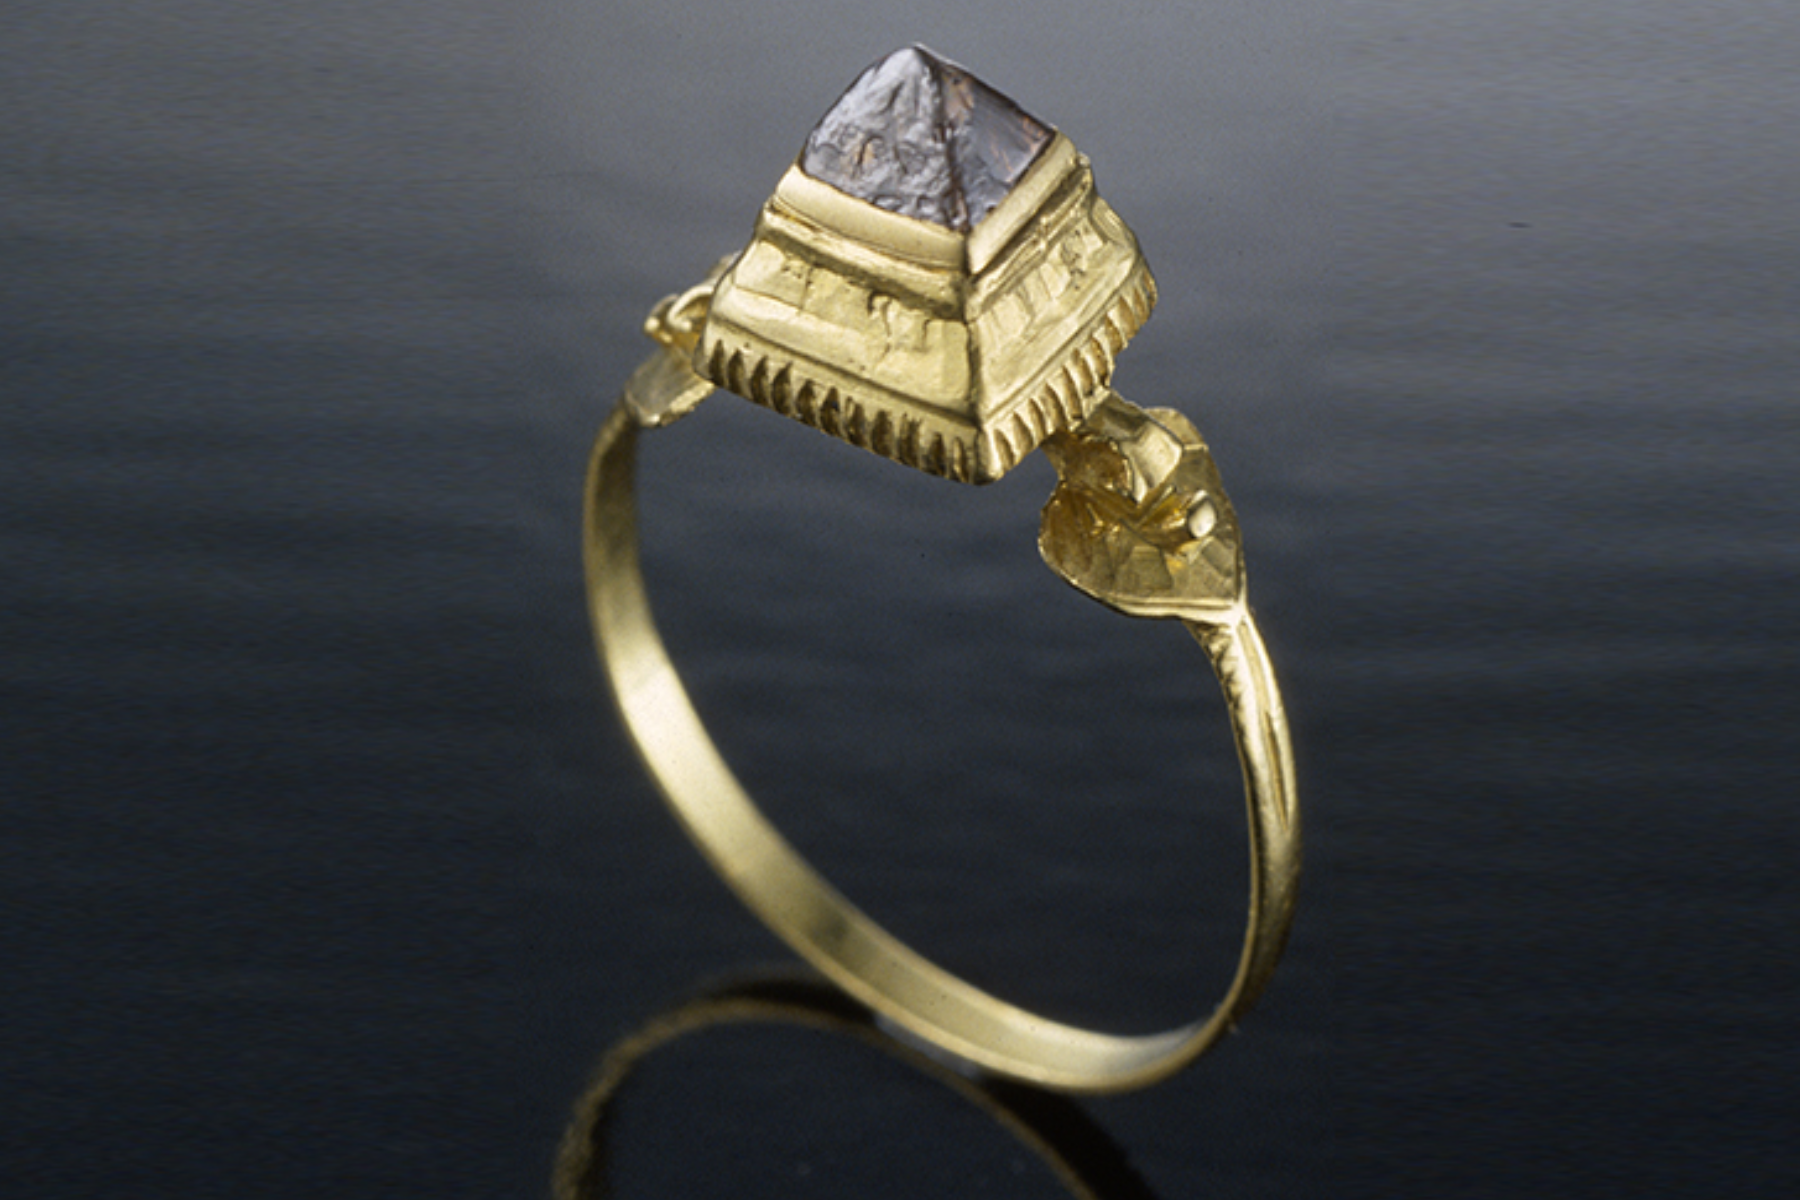 An image of a gold antique ring with a stone set at the top